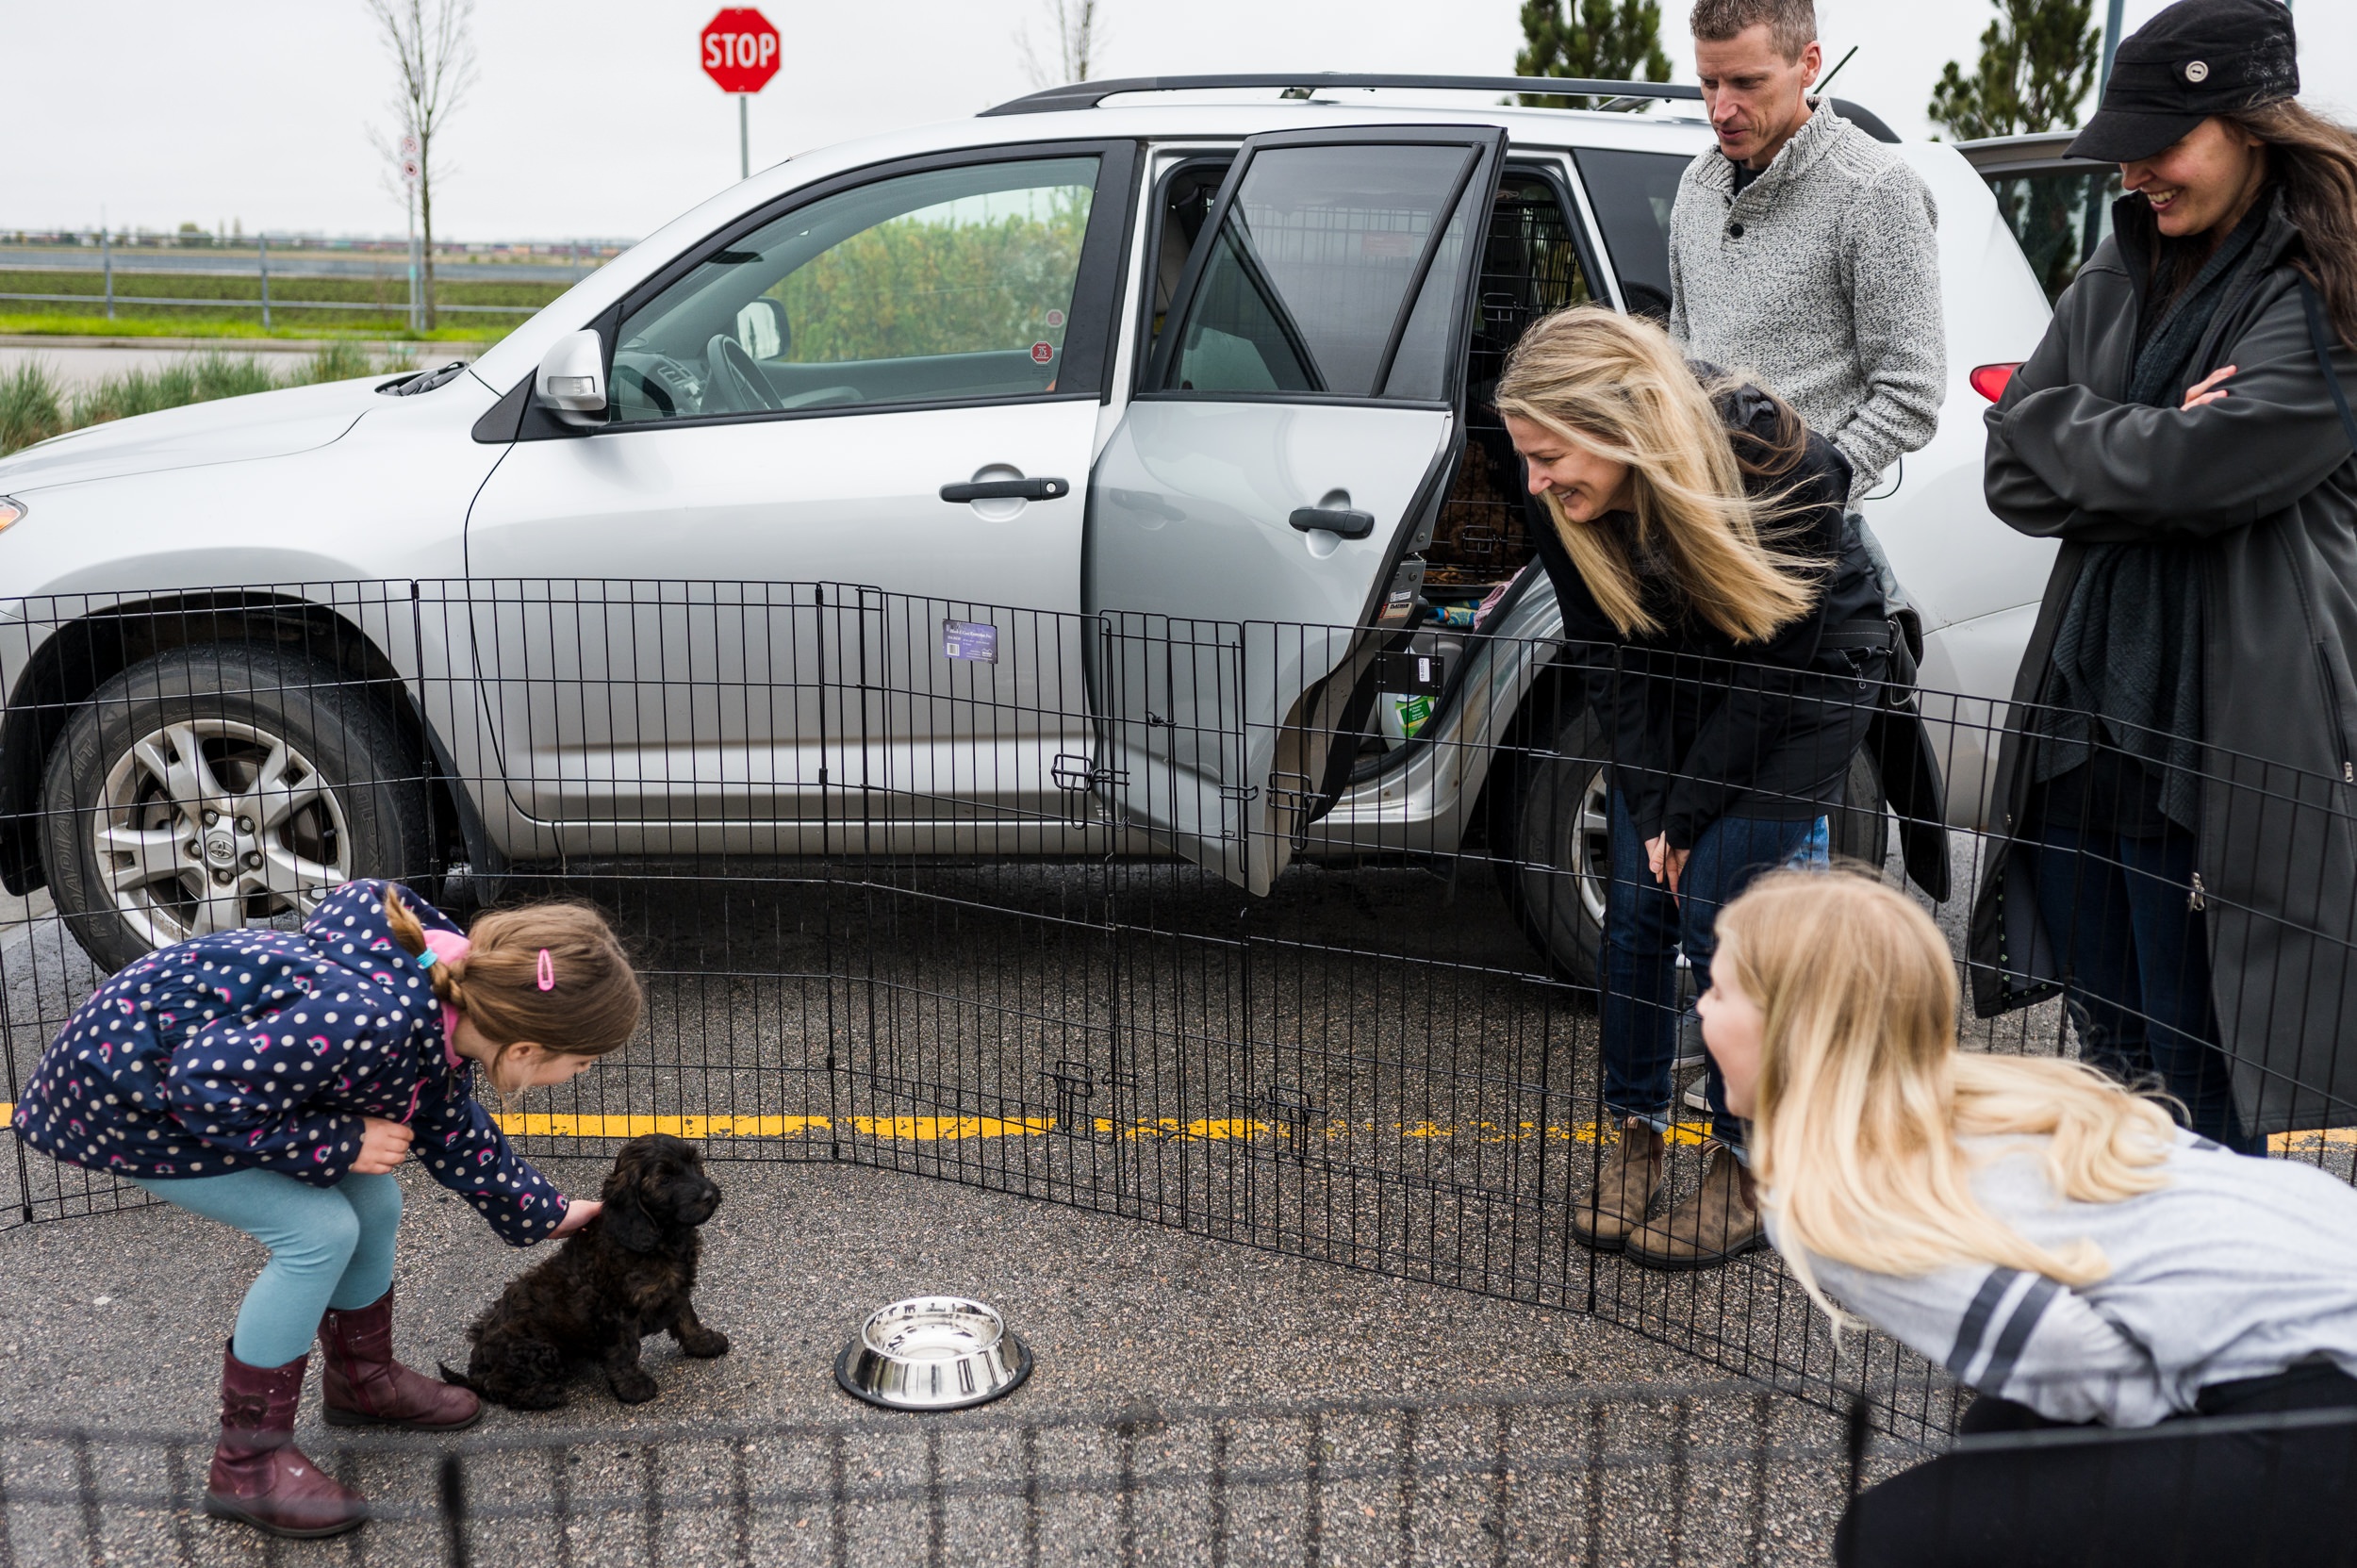 family meeting their puppy for the first time in a parking lot